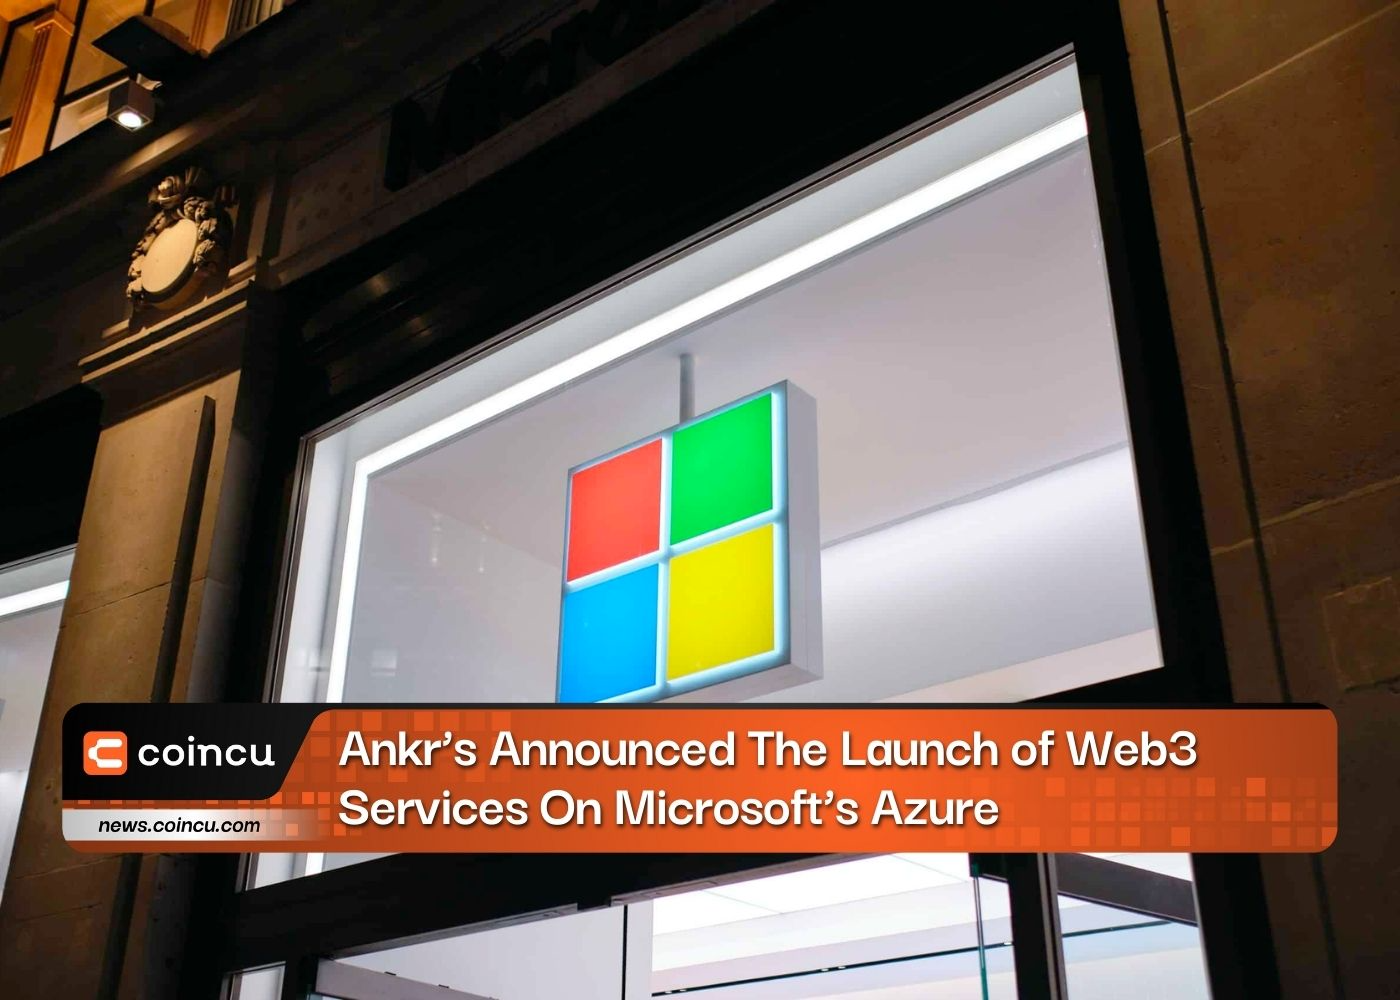 Ankr’s Announced The Launch of Web3 Services On Microsoft’s Azure